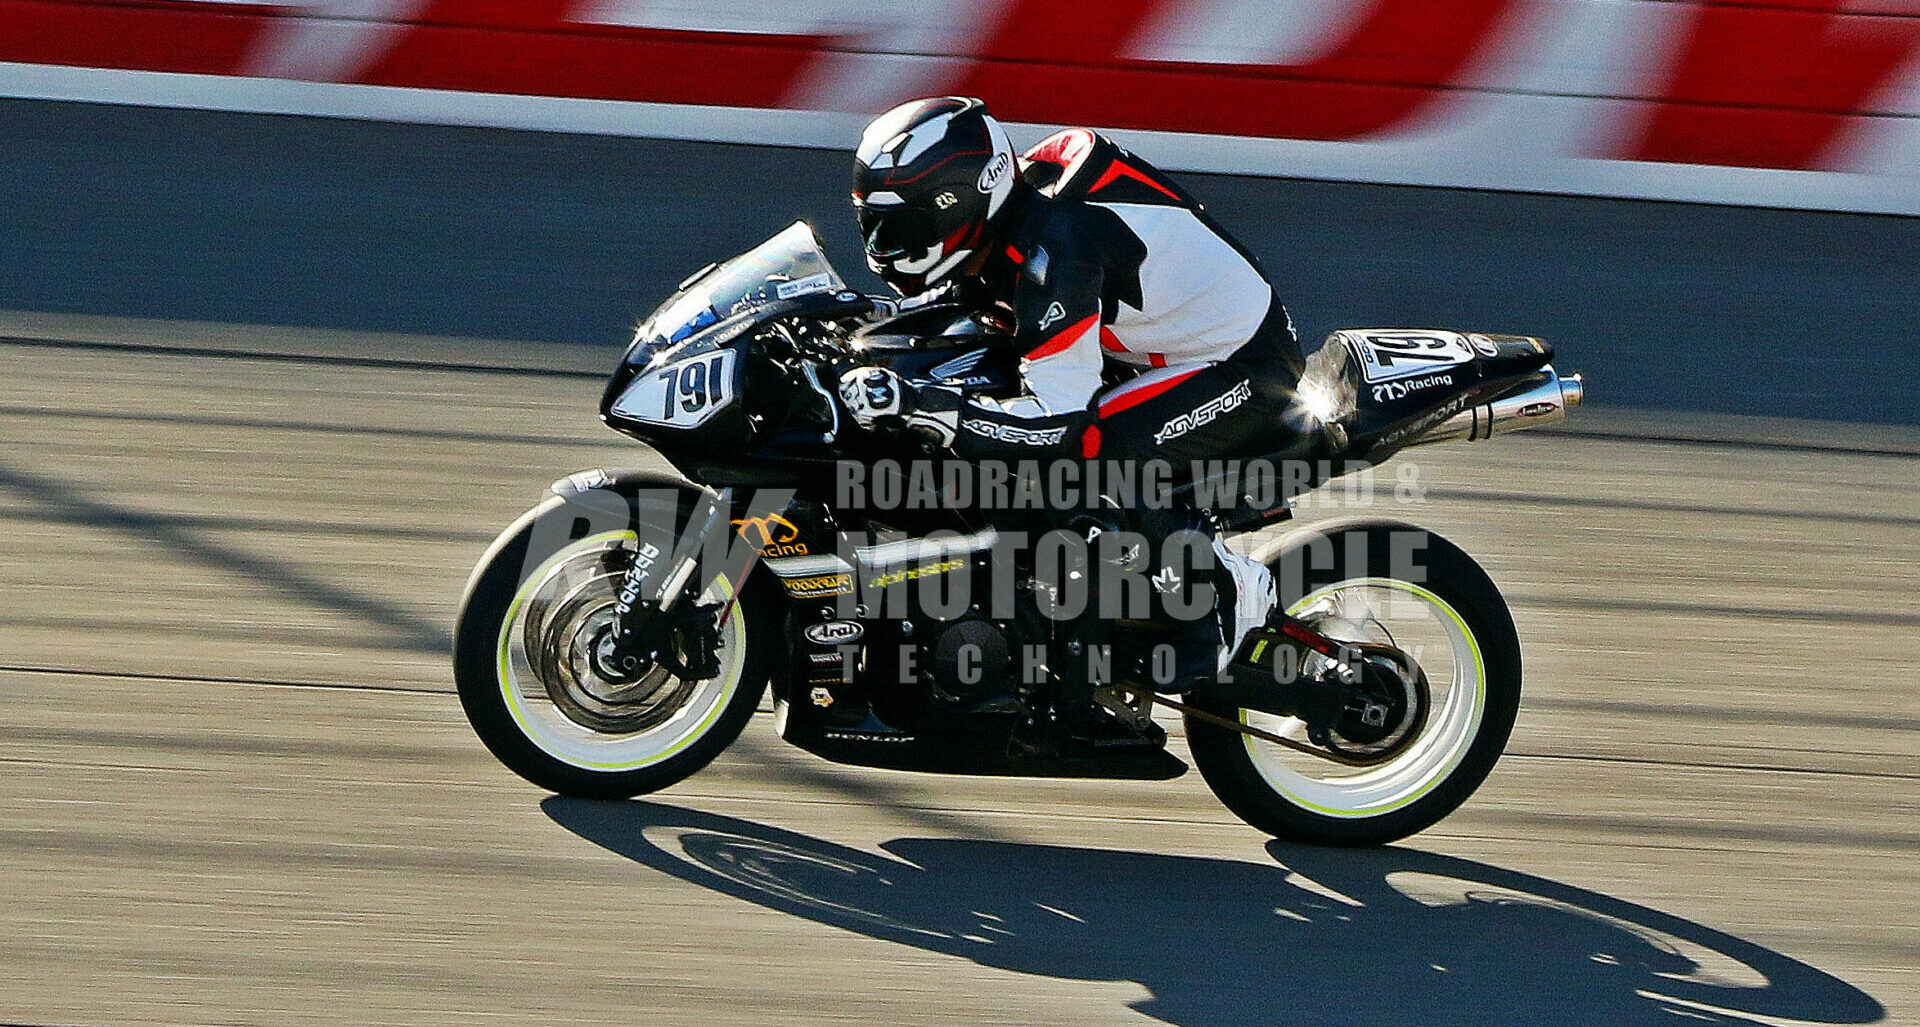 Before crash-testing safety gear and smashing race bodywork: The author and his Honda CBR600RR on the banking at Auto Club Speedway, wearing an Arai Regent-X helmet, AGV Monza one-piece racing suit and gloves, Alpinestars Supertech R boots and body armor. All performed without fail. Photo courtesy Caliphotography.com.